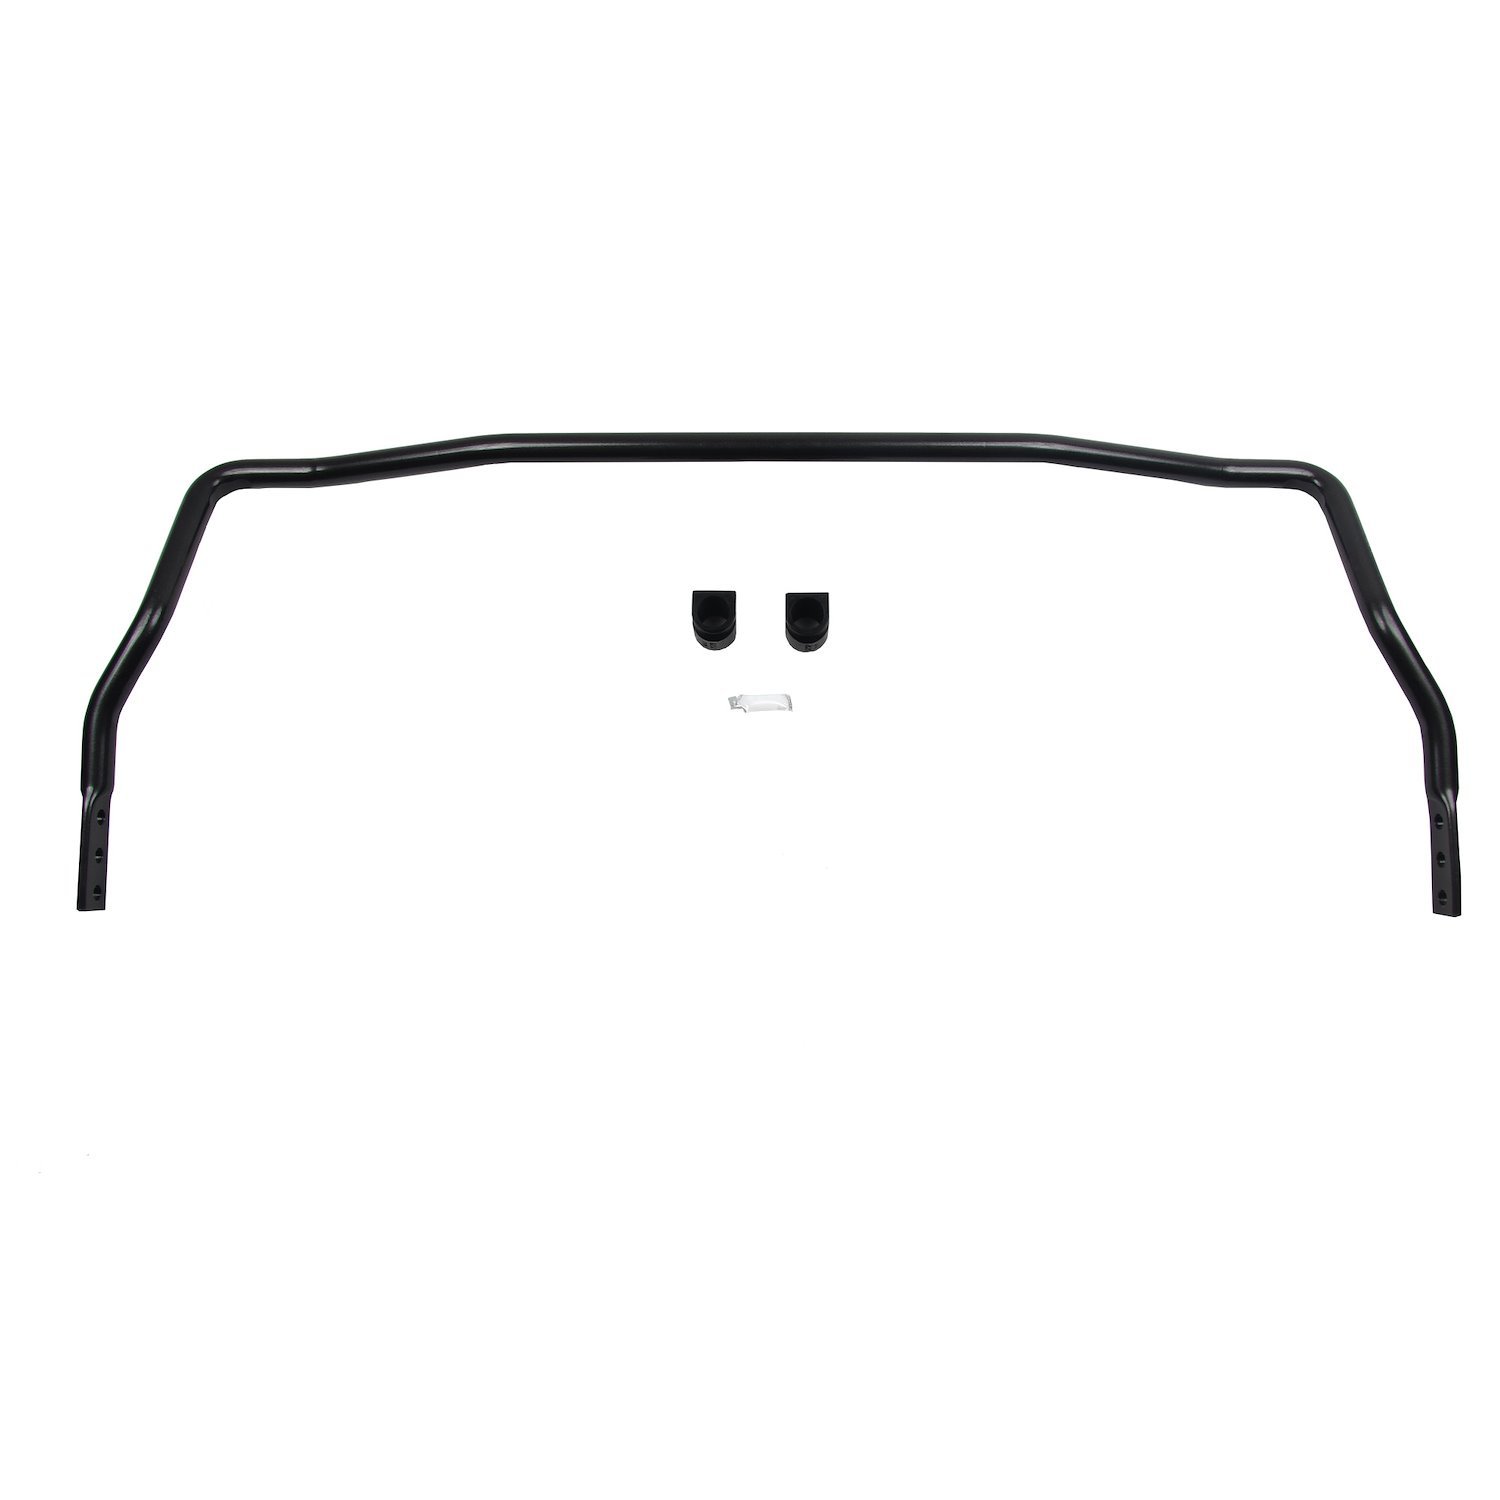 50020 Anti-Swaybar - Front for 82-88 BMW E28, E24